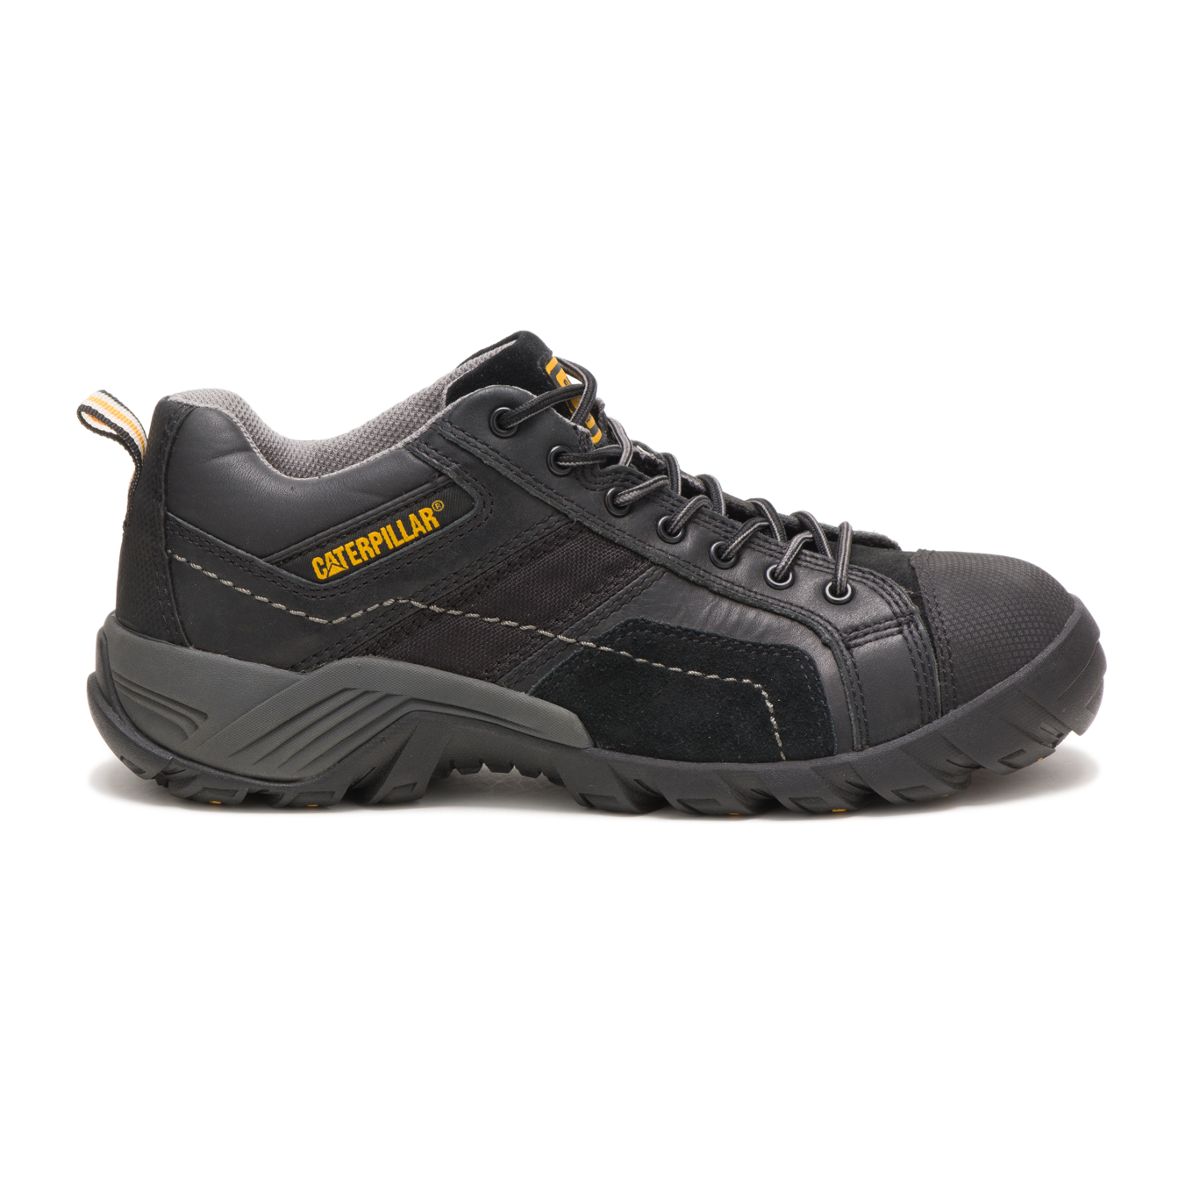 size 15 composite toe safety shoes